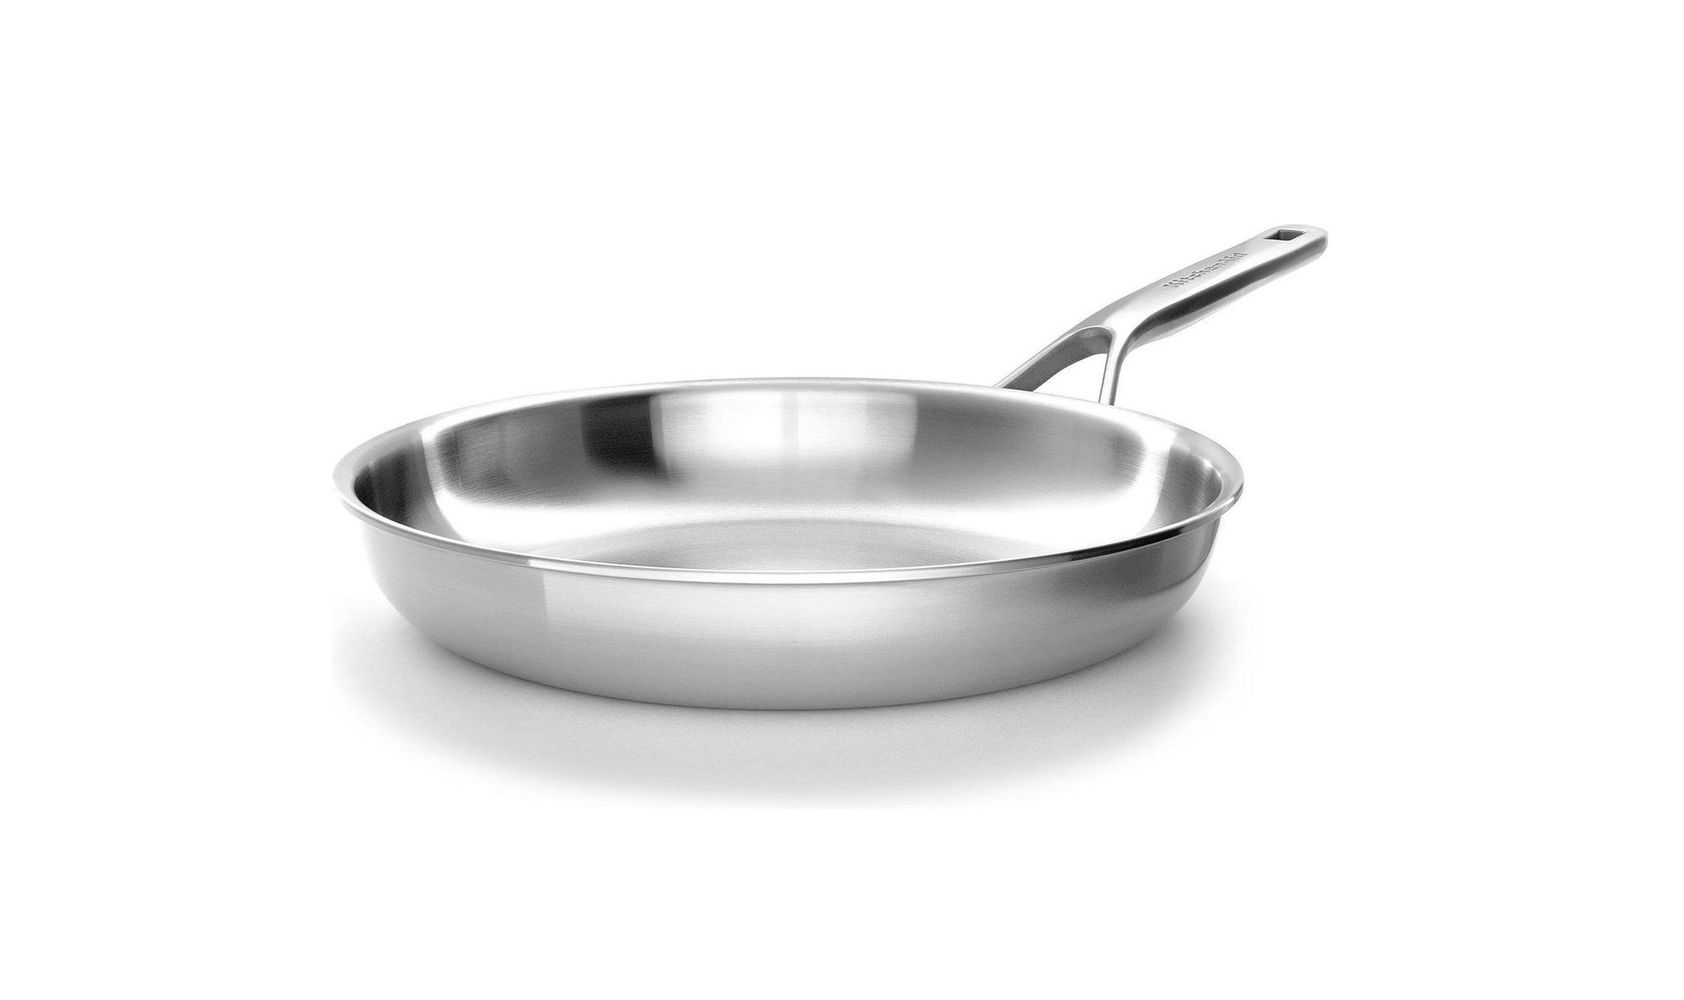 In-Depth Product Review: KitchenAid Tri-Ply Stainless Steel Cookware